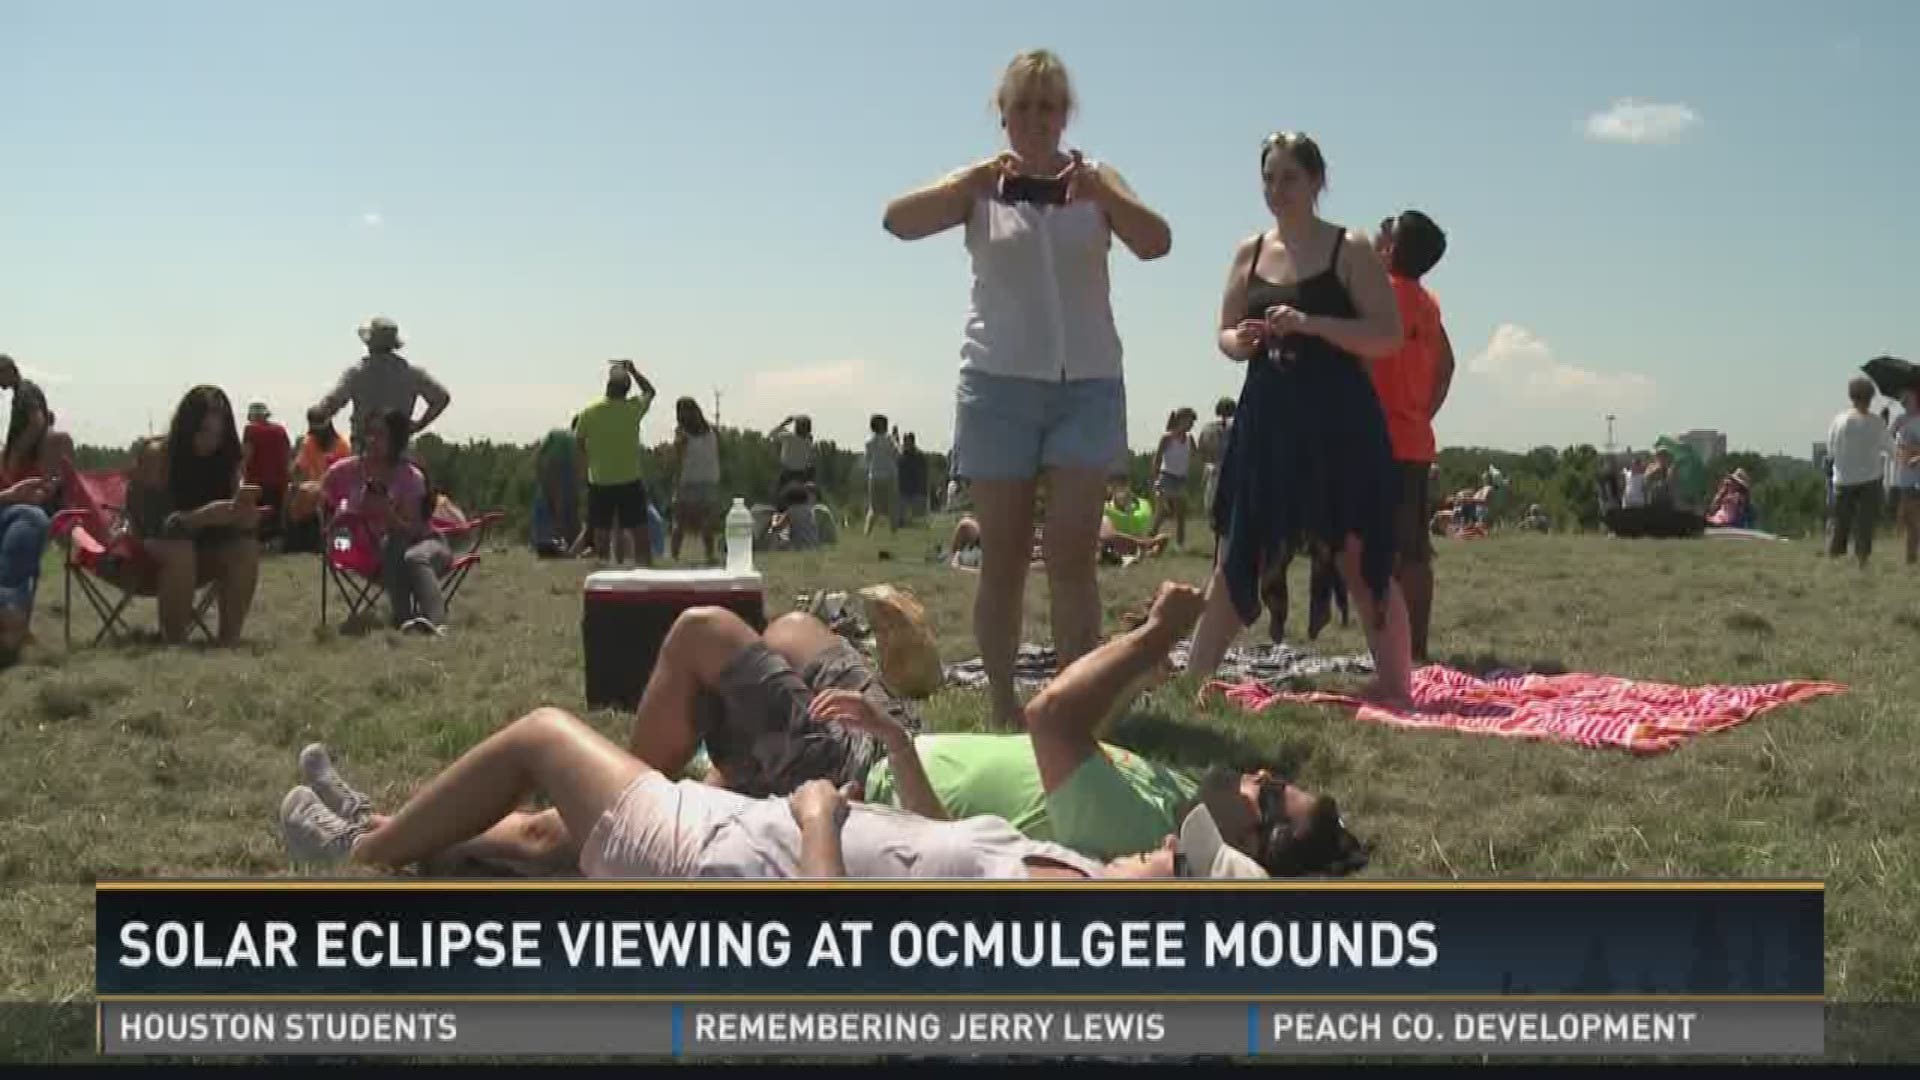 Solar eclipse viewing at Ocmulgee Mounds